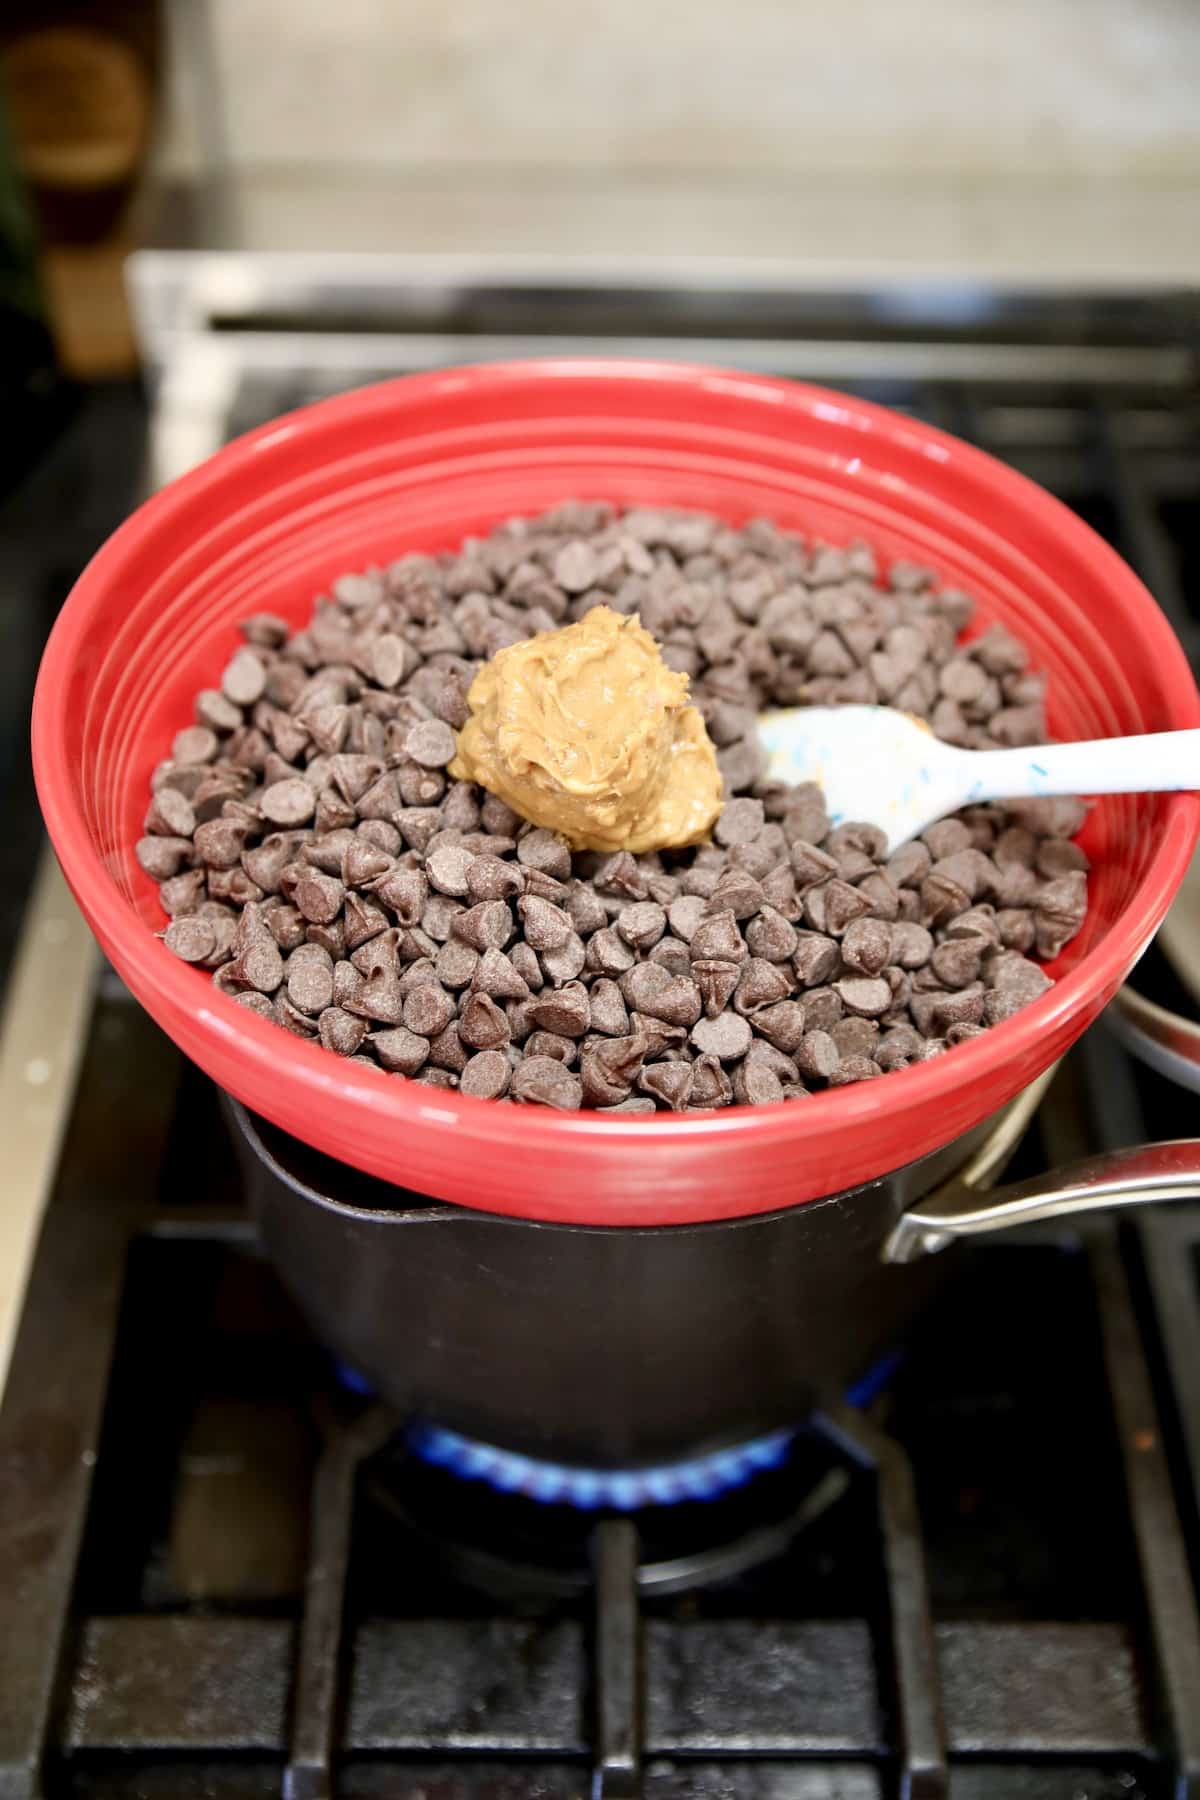 Using a bowl and pan as double boiler to melt chocolate.